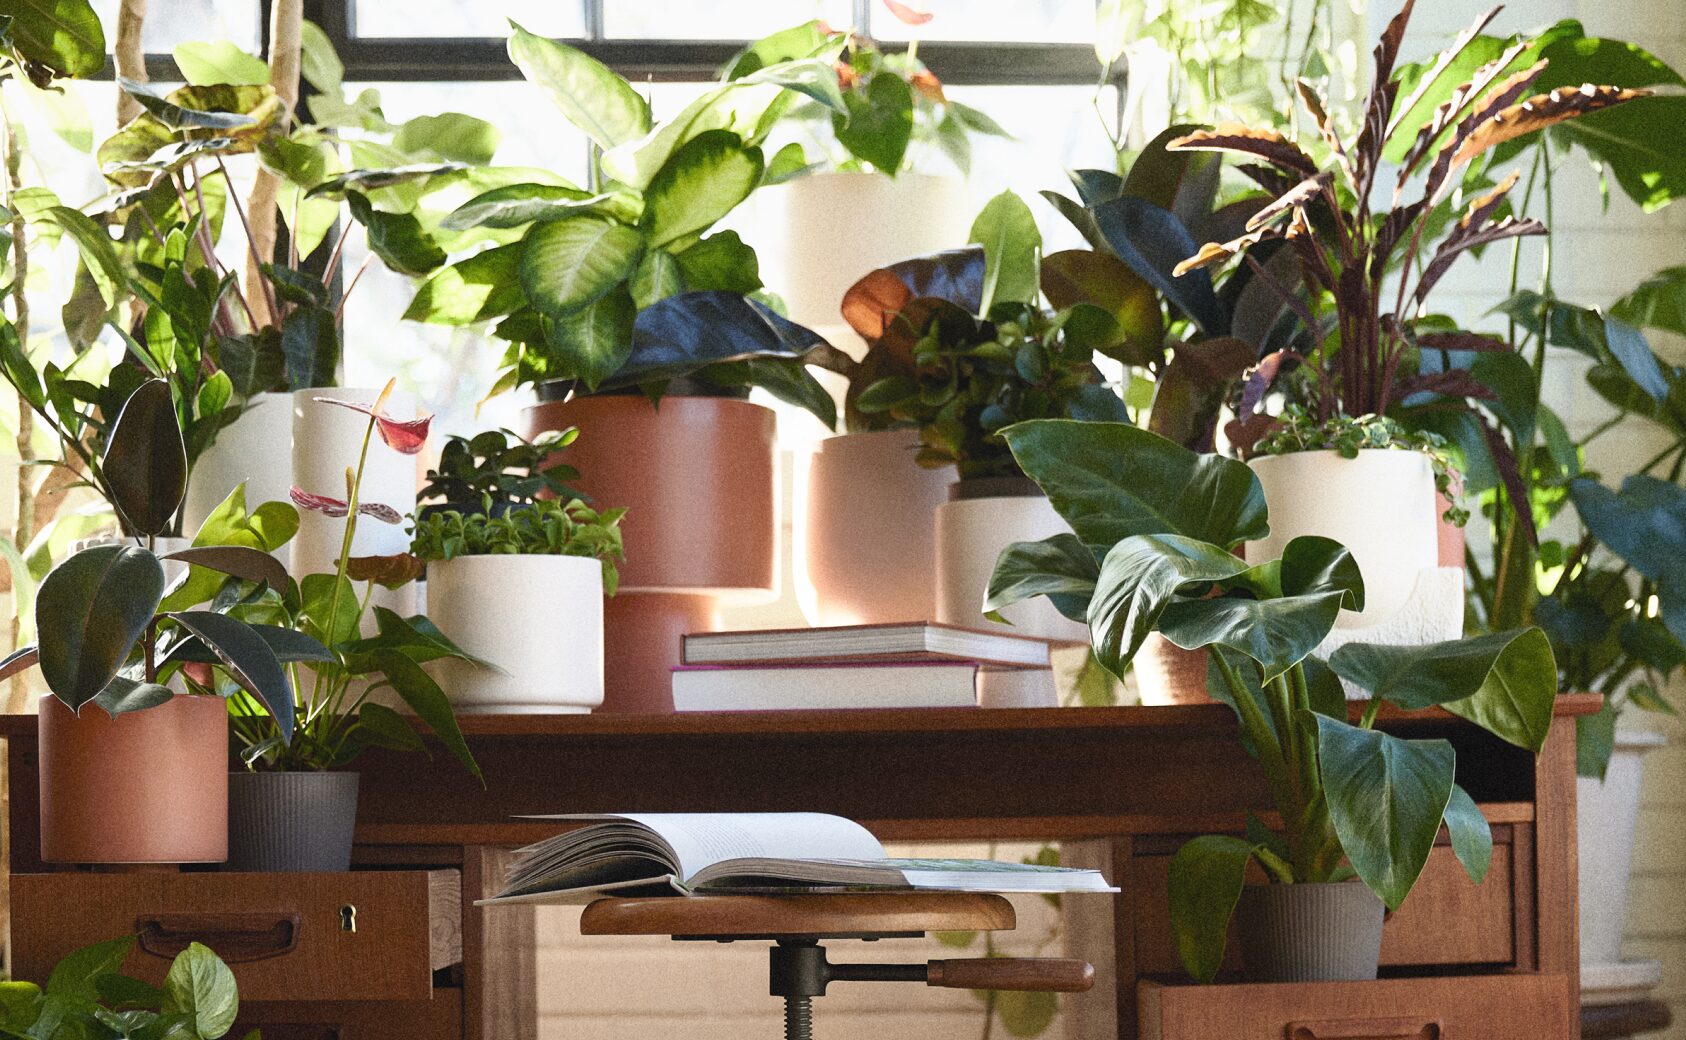 Indoor plants in OUI planters on a table with books.